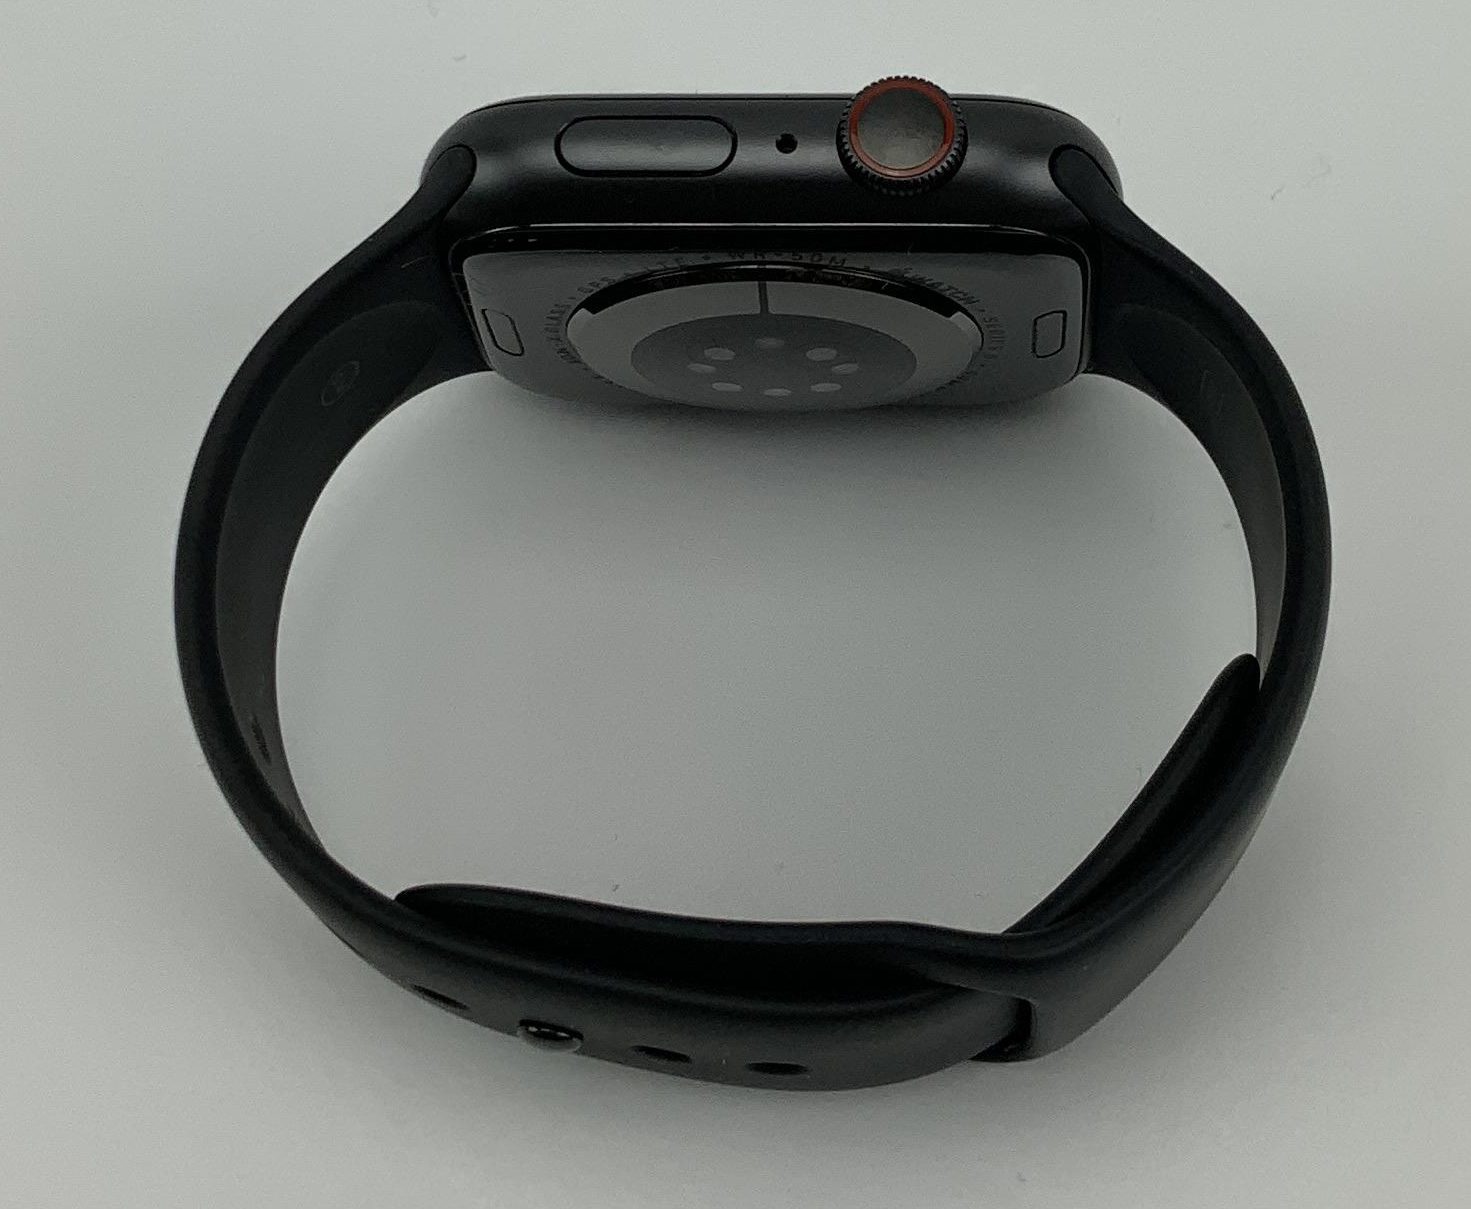 Watch Series 6 Aluminum Cellular (44mm), Space Gray, image 4